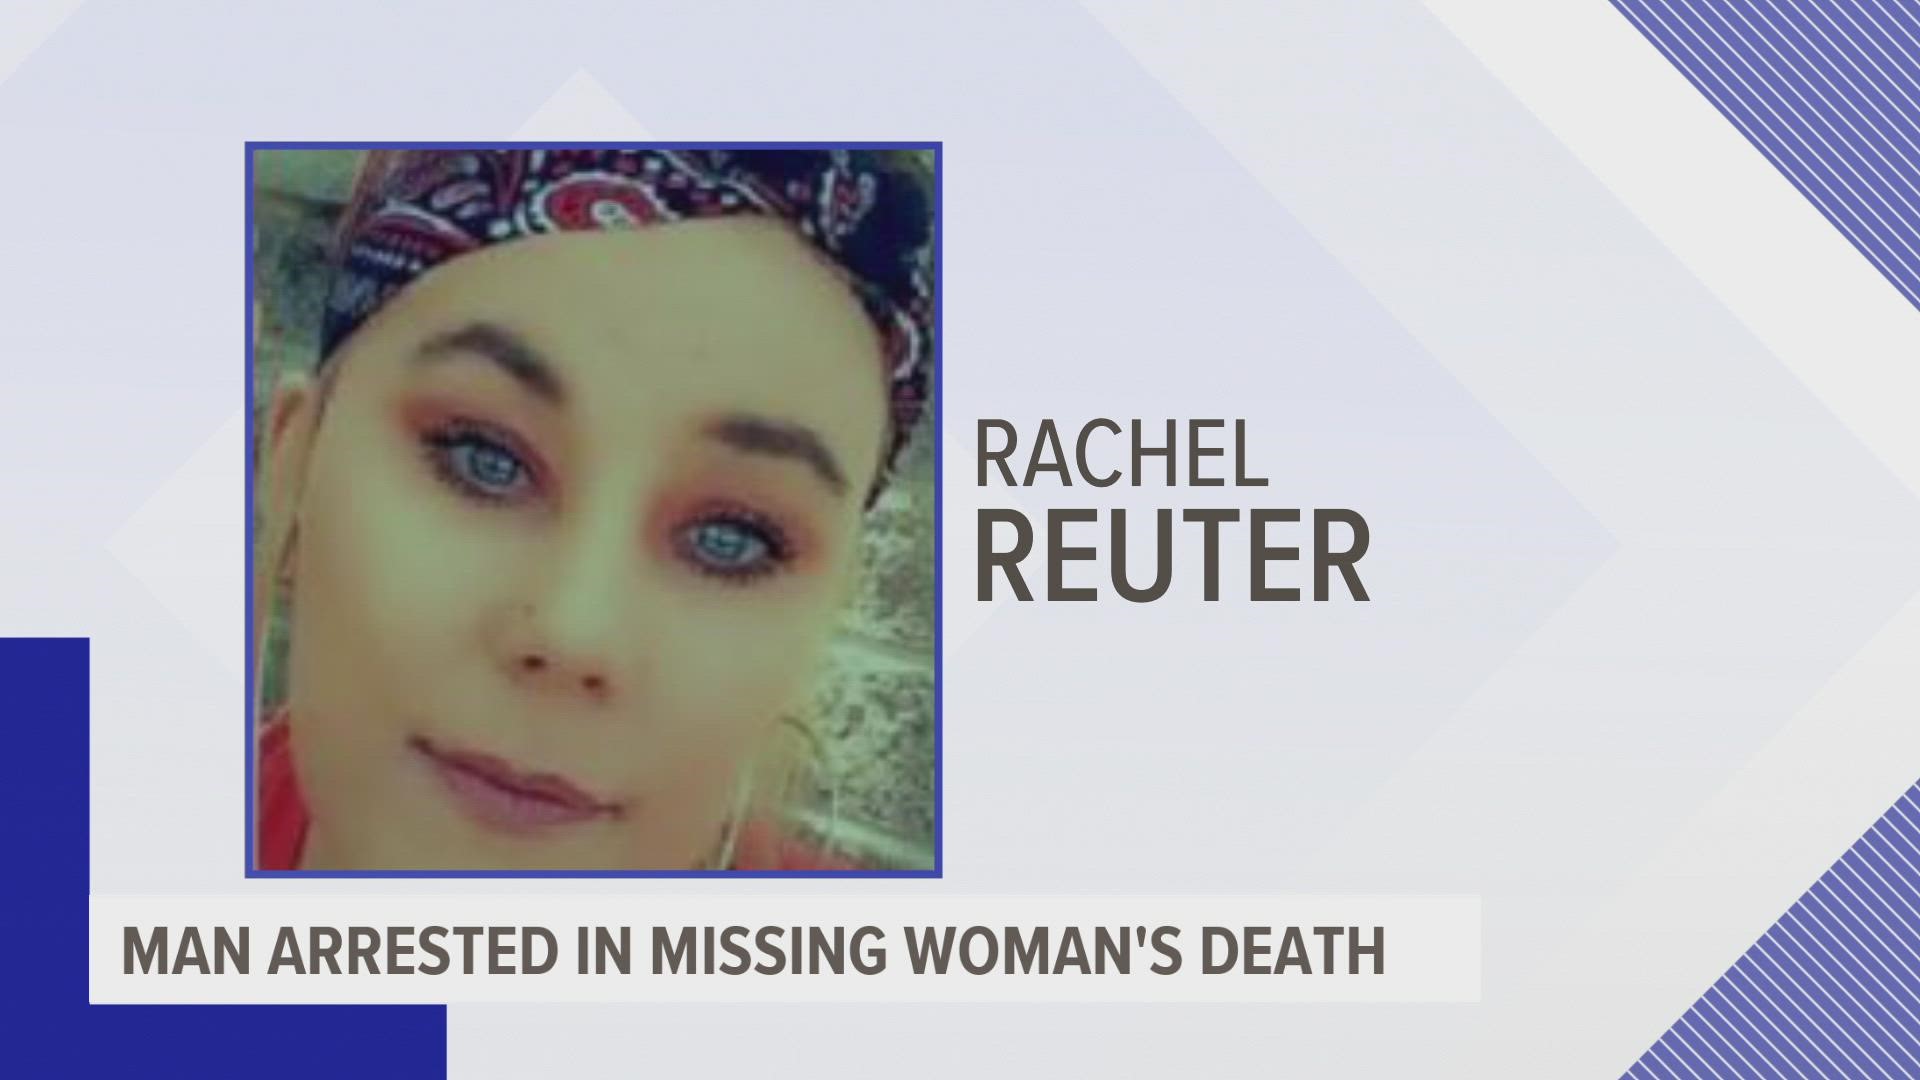 While the body of 30-year-old Rachel Reuter has yet to be found, authorities say evidence and information changed it from a missing person to a homicide case.